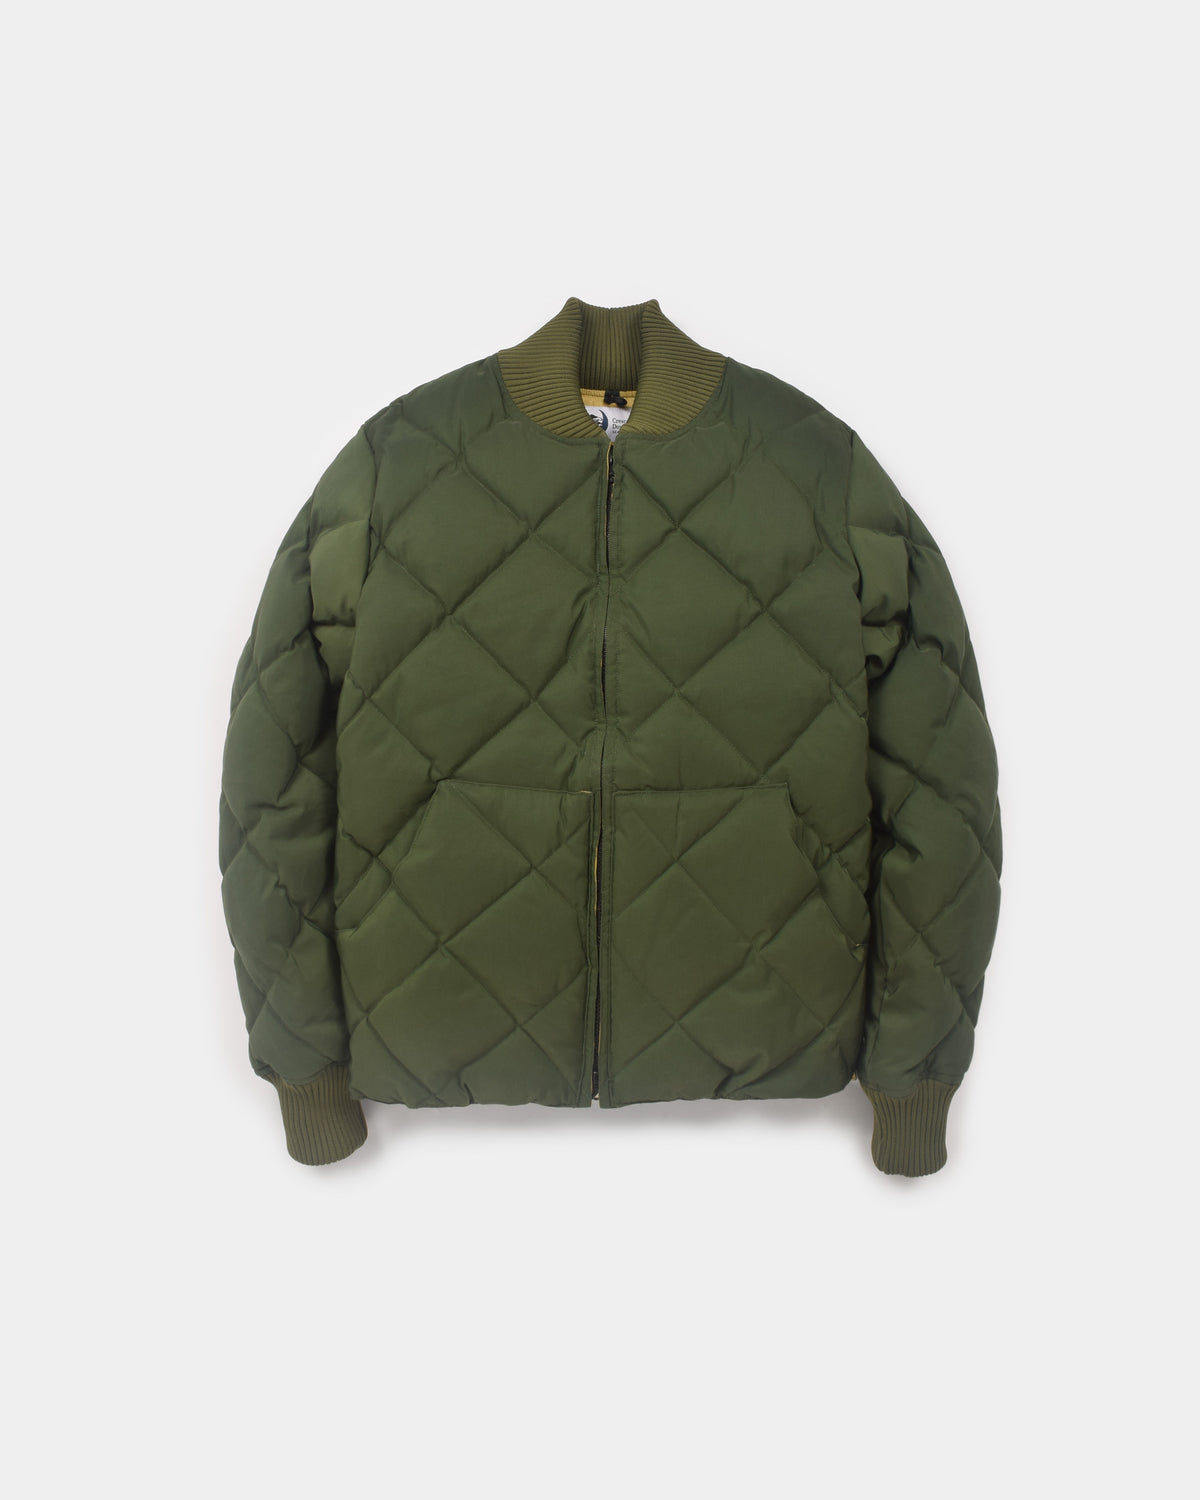 Diagonal Quilt Sweater - Olive